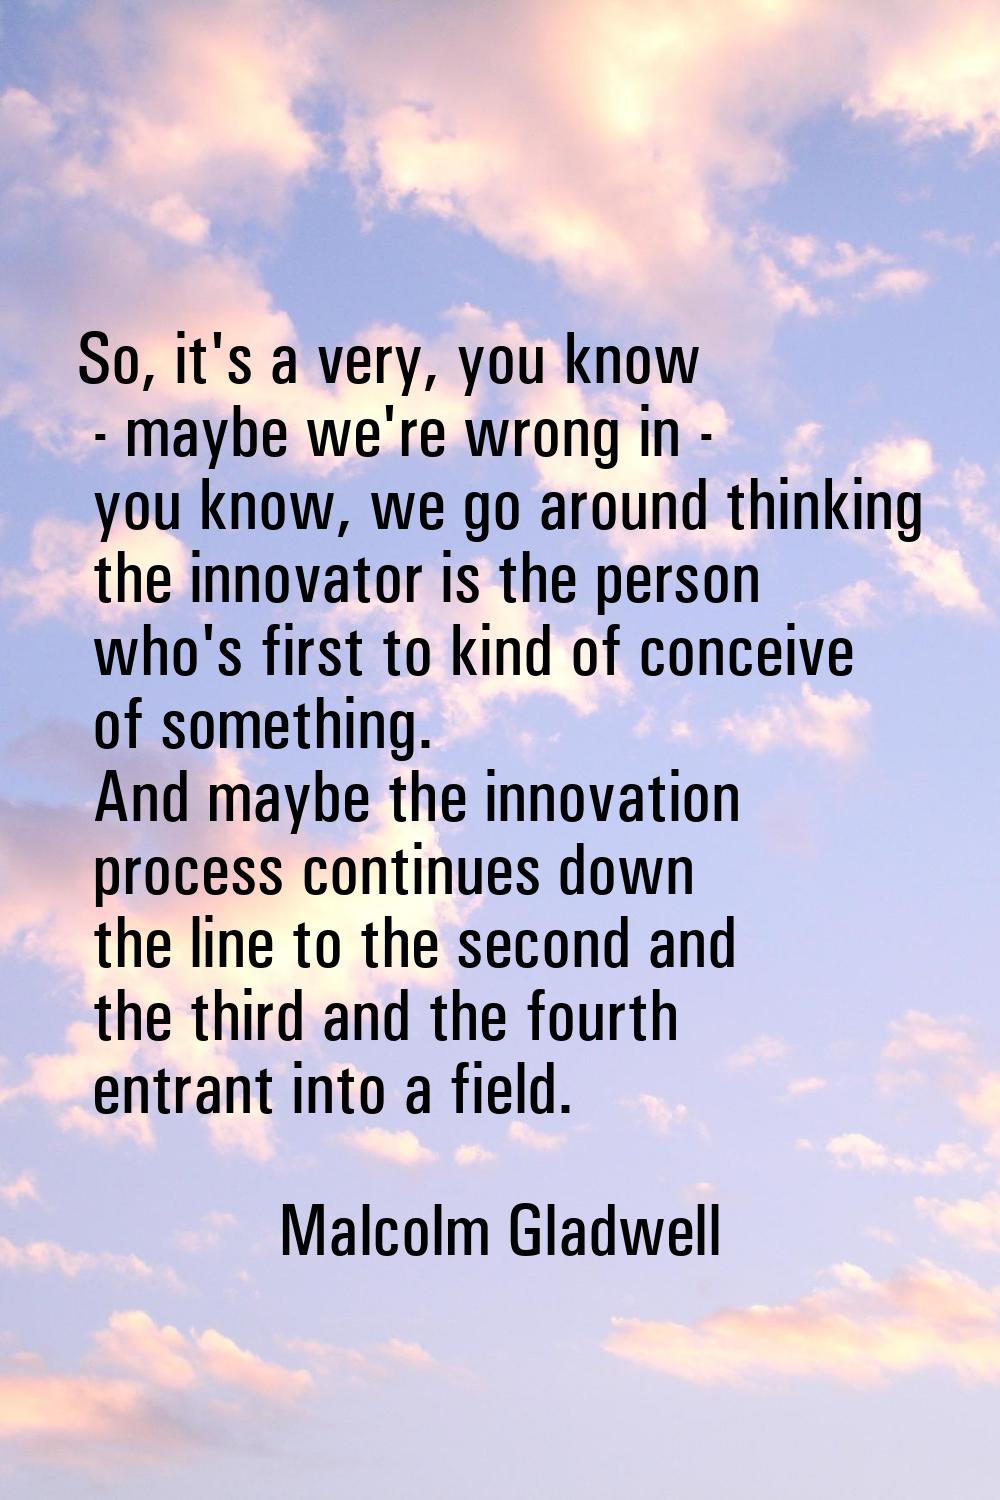 So, it's a very, you know - maybe we're wrong in - you know, we go around thinking the innovator is